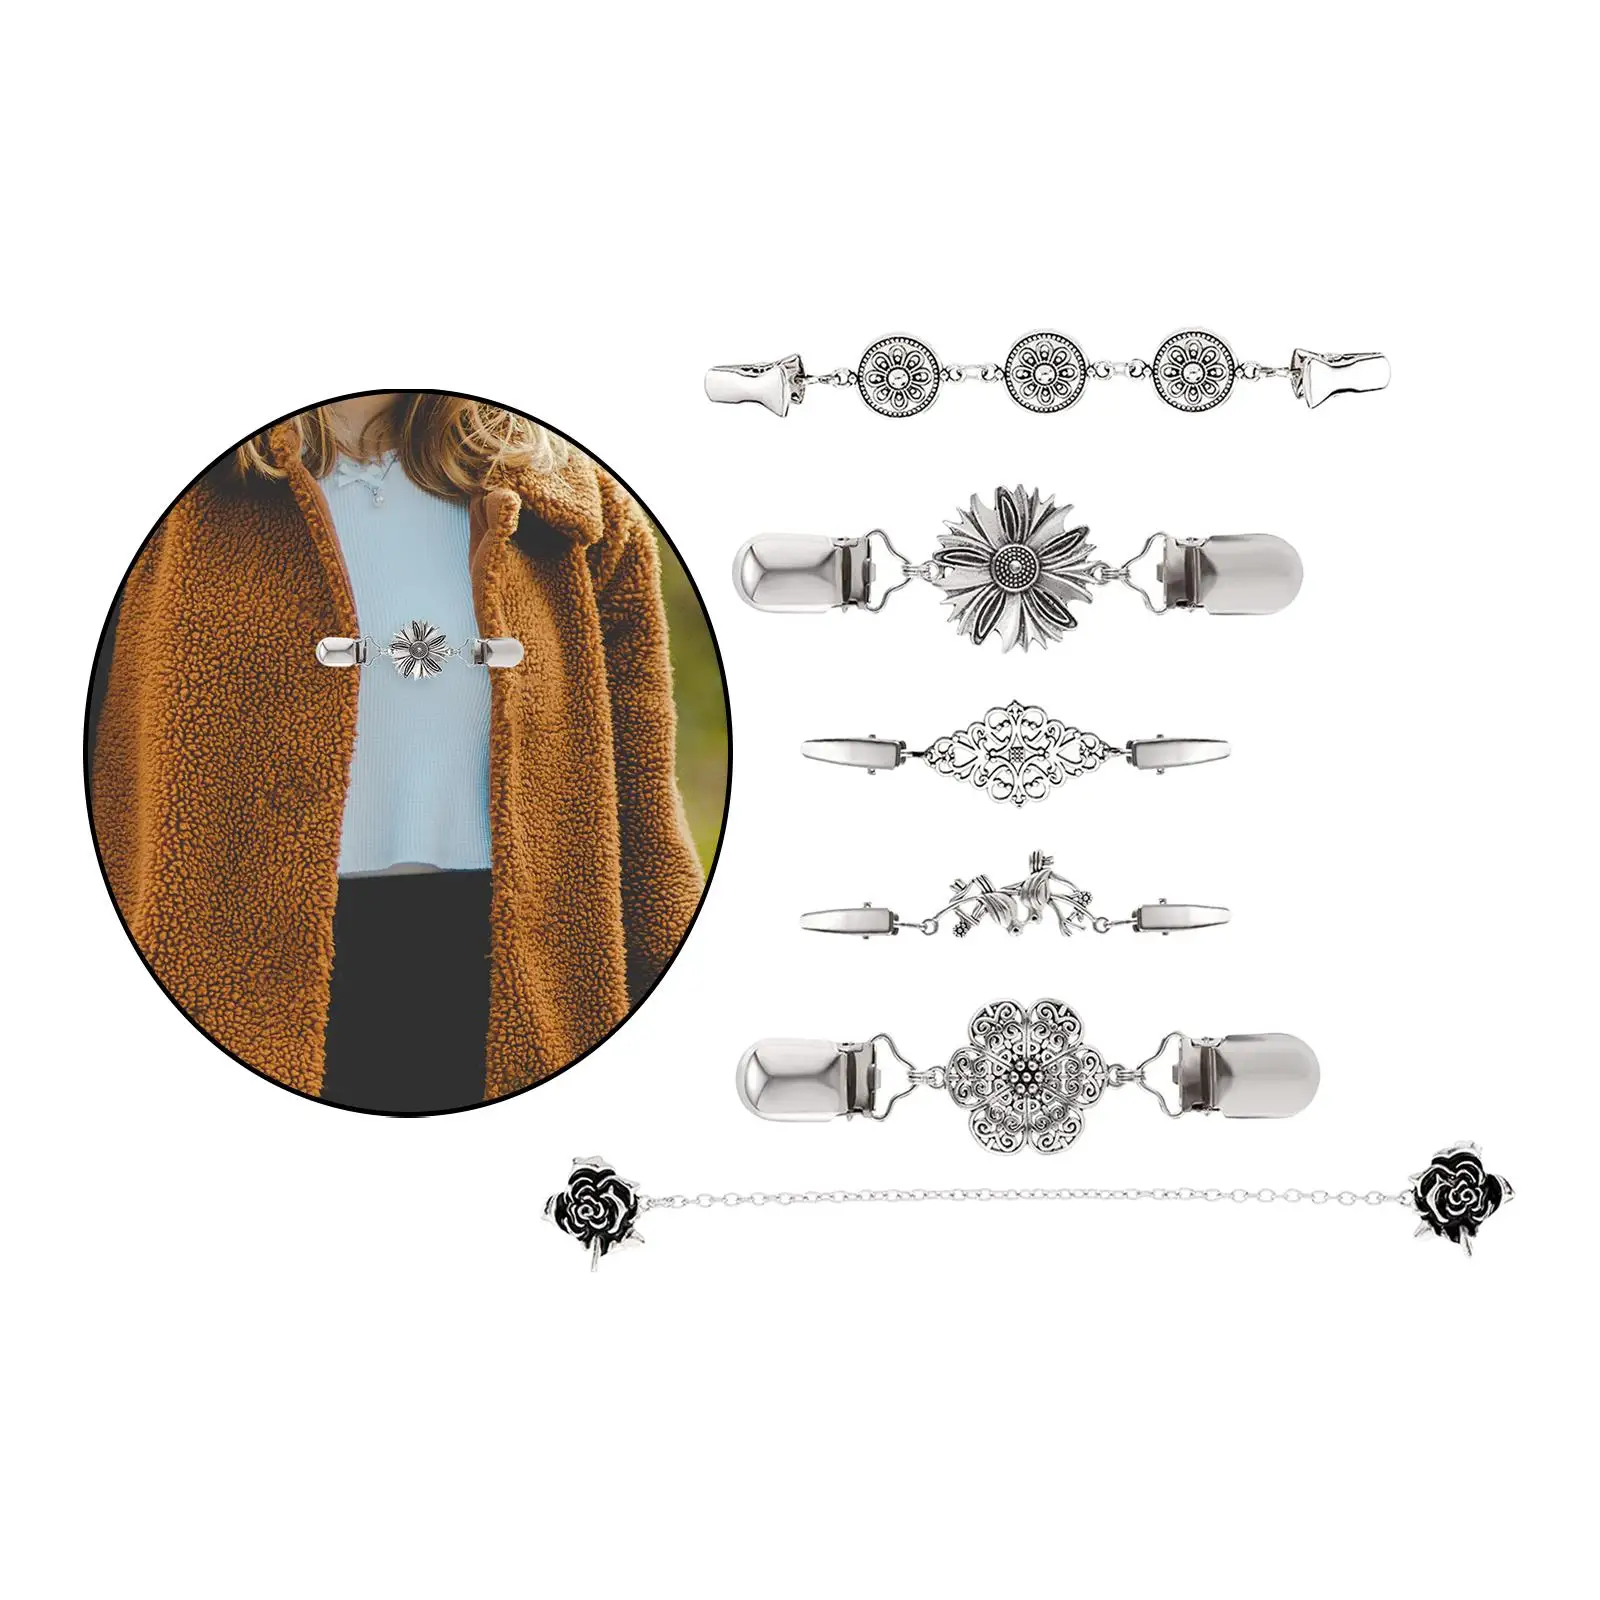 6Pcs Fashion Sweater Clips Brooch Blouse Clothes Dresses Jackets Buckles Coat Cardigan Clasp for Women Girls Wearing Decoration